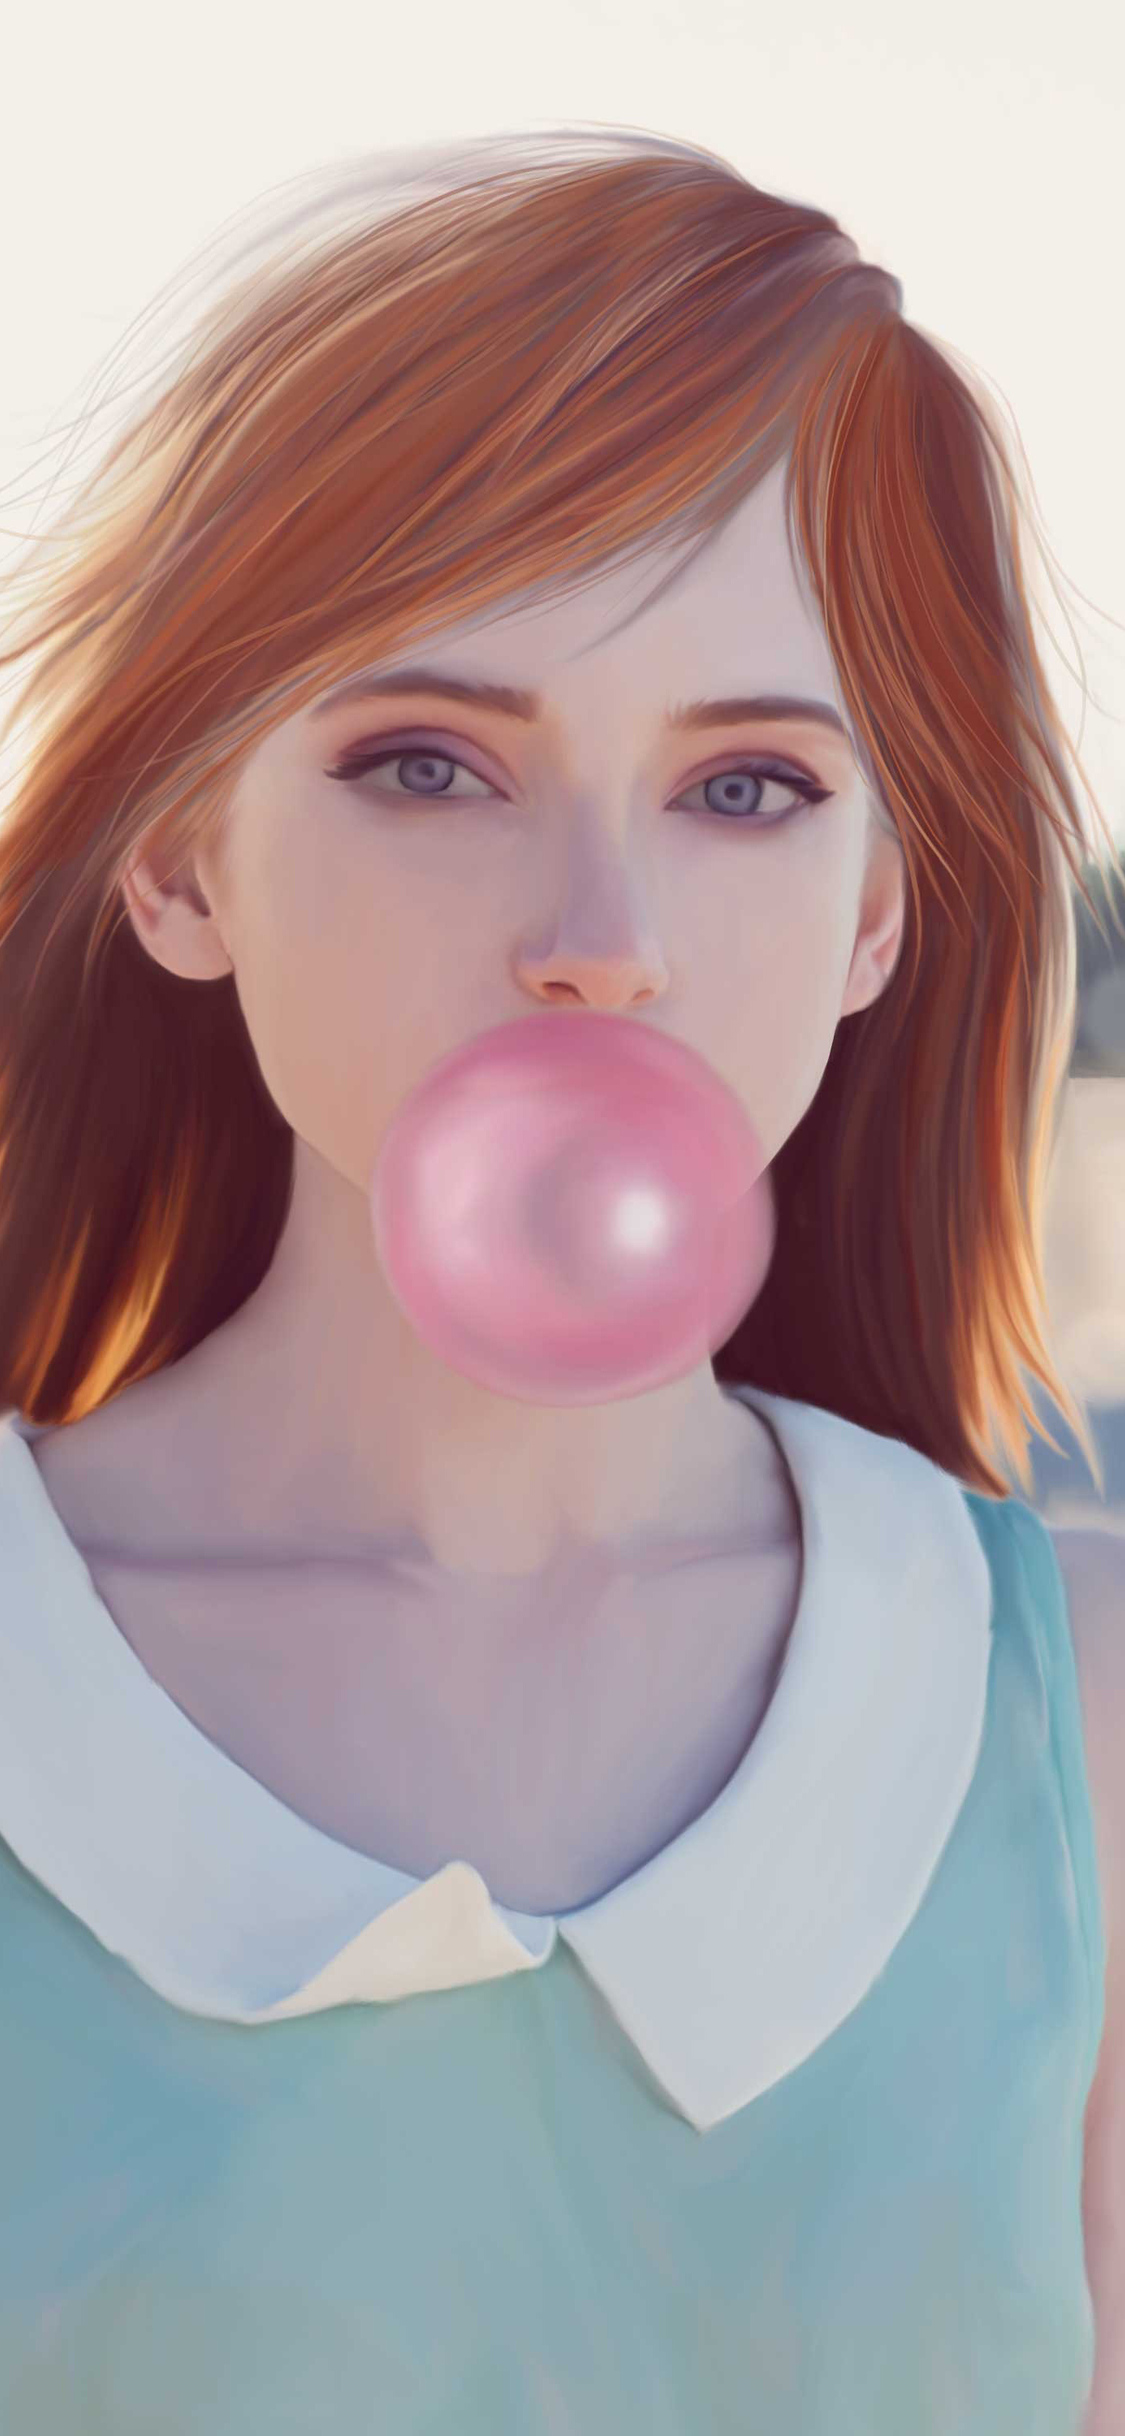 1125x2436 Girl Blowing Bubble Gum Iphone Xs Iphone 10 Iphone X Hd